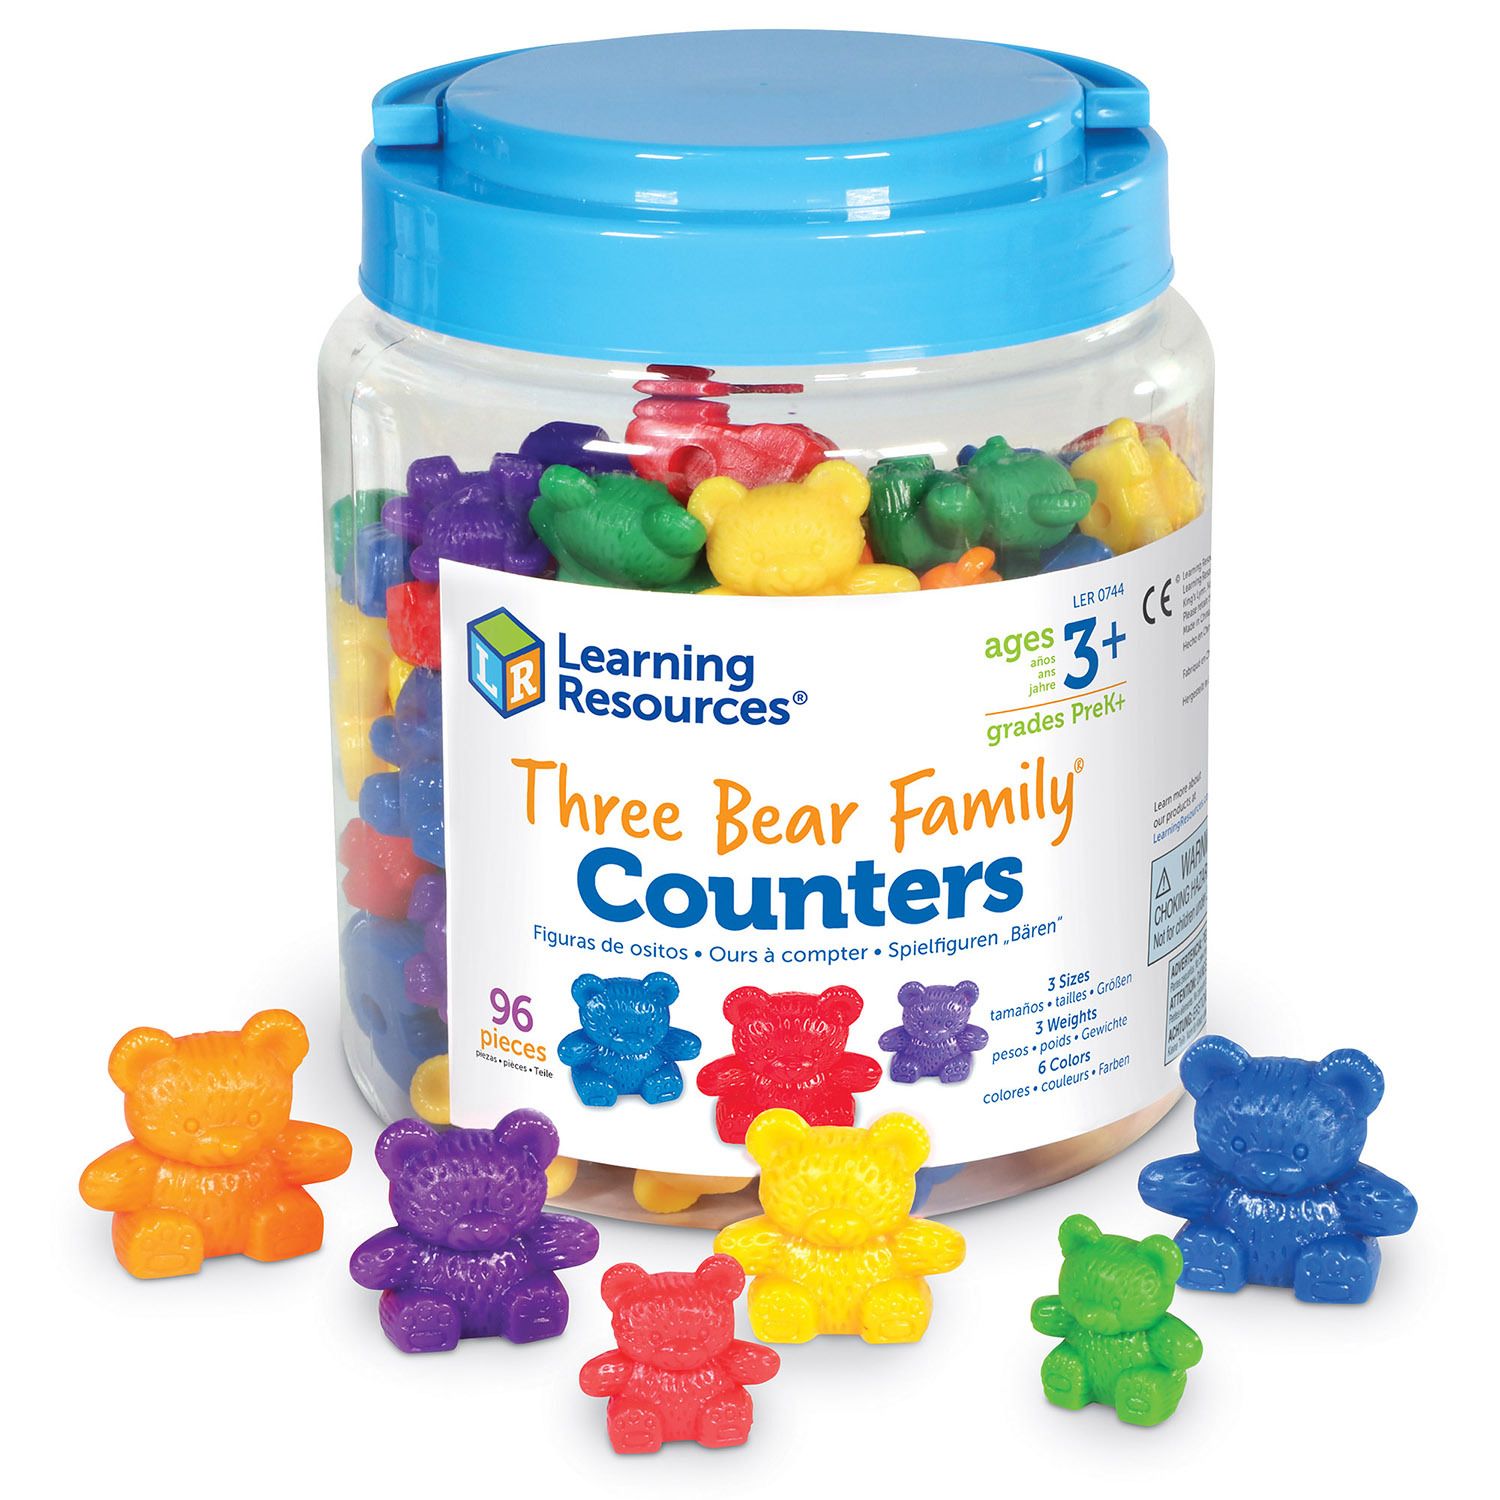 Image for Learning Resources Three Bear Family Rainbow Counters, Set of 96 at Kohl's.